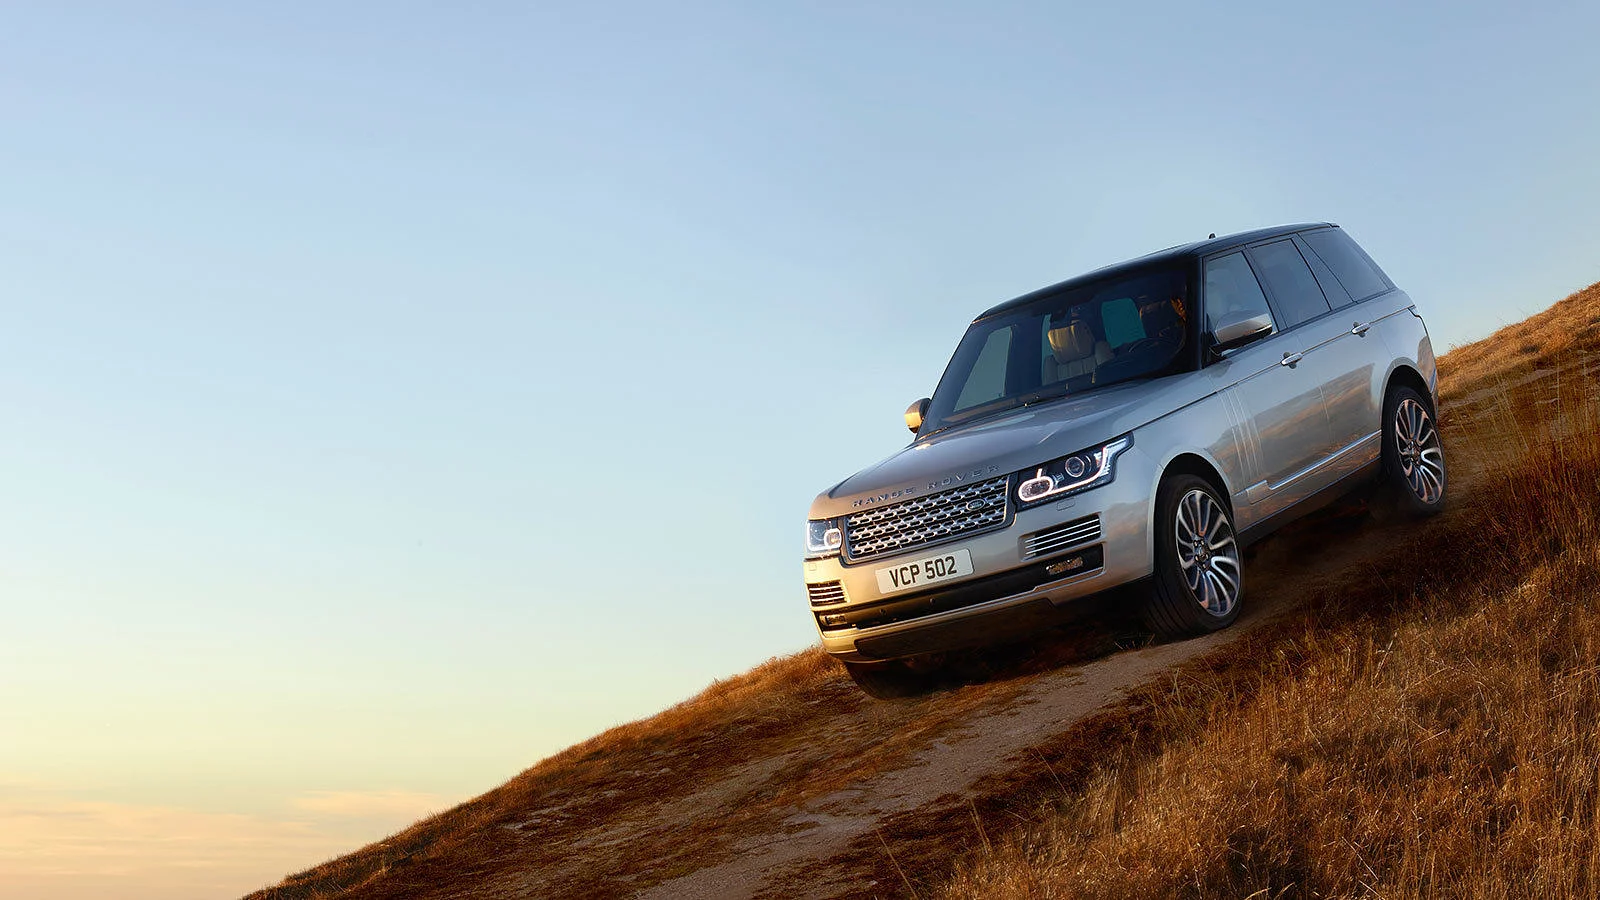 SCALE NEW HEIGHTS WITH LAND ROVER